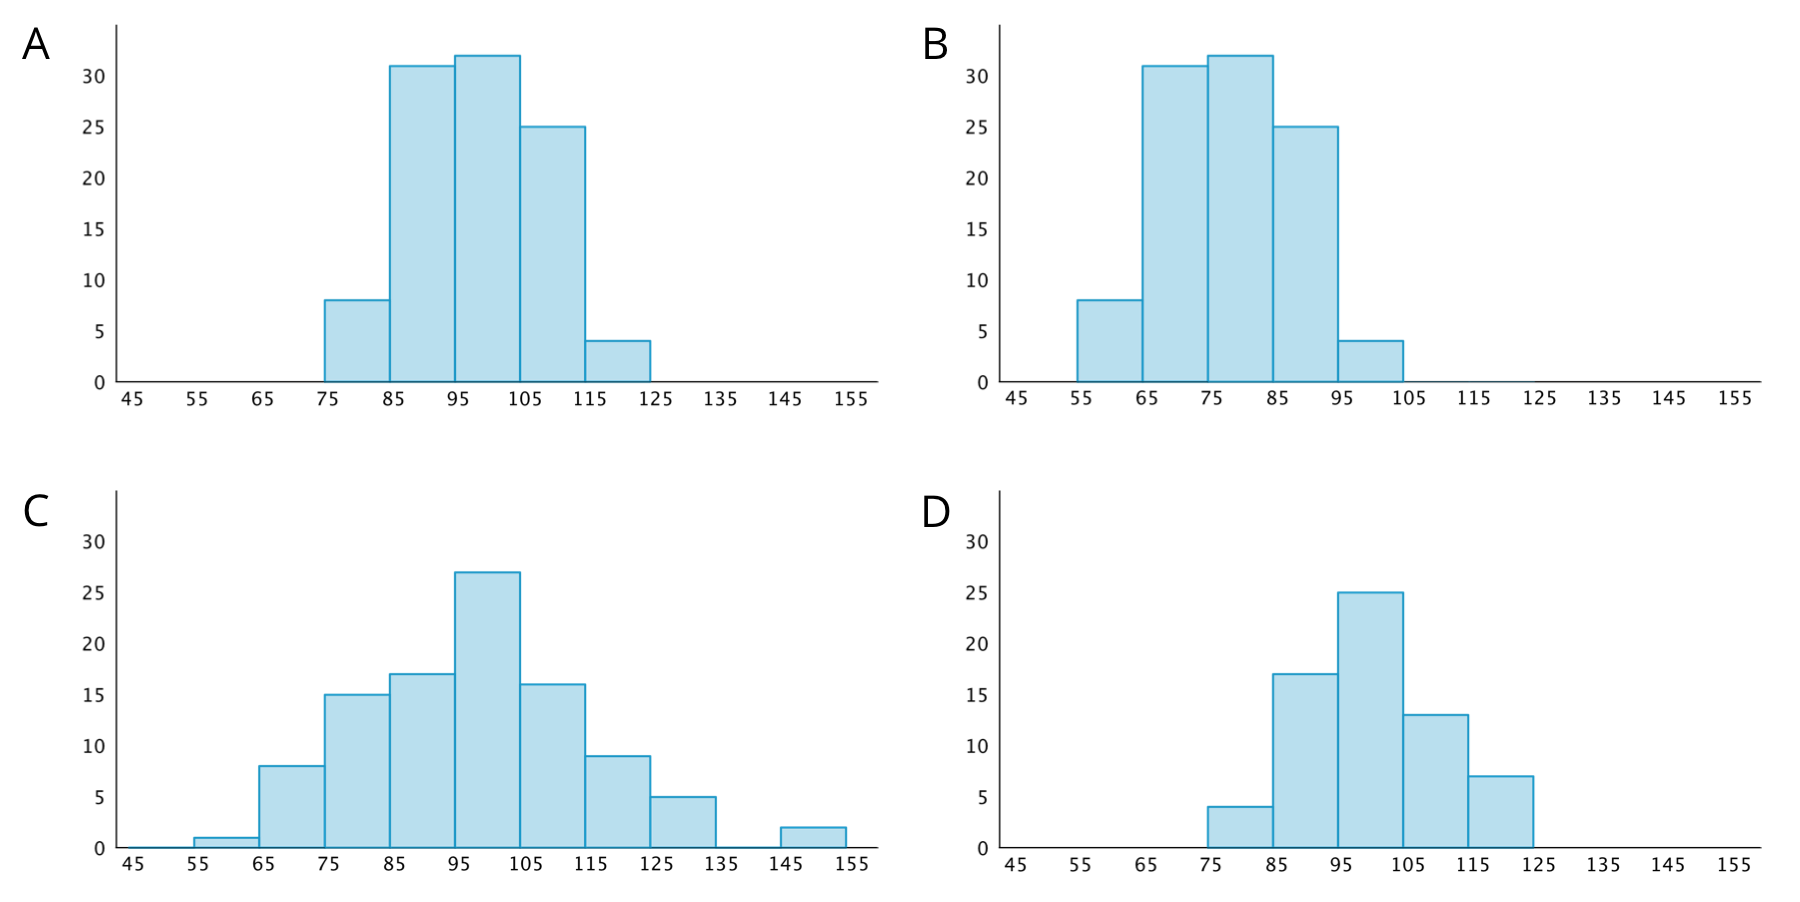 Four histograms, labeled A, B, C, and D: Each histogram has a horizontal axis with the numbers 45 through 155, in increments of 10, indicated. Each histogram has a vertical axis with the numbers 0 through 30, in increments of 5, indicated.  The data represented by the bars in histogram A are as follows:  Length from 45 up to 55, 0. Length from 55 up to 65, 0. Length from 65 up to 75, 0. Length from 75 up to 85, 7. Length from 85 up to 95, 30. Length from 95 up to 105, 31. Length from 105 up to 115, 25. Length from 115 up to 125, 3. Length from 125 to 135, 0. Length from 135 to 145, 0. Length from 145 to 155, 0.  The data represented by the bars in histogram B are as follows:  Length from 45 up to 55, 0. Length from 55 up to 65, 7. Length from 65 up to 75, 30. Length from 75 up to 85, 31. Length from 85 up to 95, 25. Length from 95 up to 105, 3. Length from 105 up to 115, 0. Length from 115 up to 125, 0. Length from 125 to 135, 0. Length from 135 to 145, 0. Length from 145 to 155, 0.  The data represented by the bars in histogram C are as follows:  Length from 45 up to 55, 0. Length from 55 up to 65, 1. Length from 65 up to 75, 7. Length from 75 up to 85,15. Length from 85 up to 95, 17. Length from 95 up to 105, 26. Length from 105 up to 115, 16. Length from 115 up to 125, 8. Length from 125 to 135, 5. Length from 135 to 145, 0. Length from 145 to 155, 2.  The data represented by the bars in histogram D are as follows:  Length from 45 up to 55, 0. Length from 55 up to 65, 0. Length from 65 up to 75, 0. Length from 75 up to 85,4. Length from 85 up to 95, 16. Length from 95 up to 105, 25. Length from 105 up to 115, 13. Length from 115 up to 125, 6. Length from 125 to 135, 0. Length from 135 to 145, 0. Length from 145 to 155, 0. 